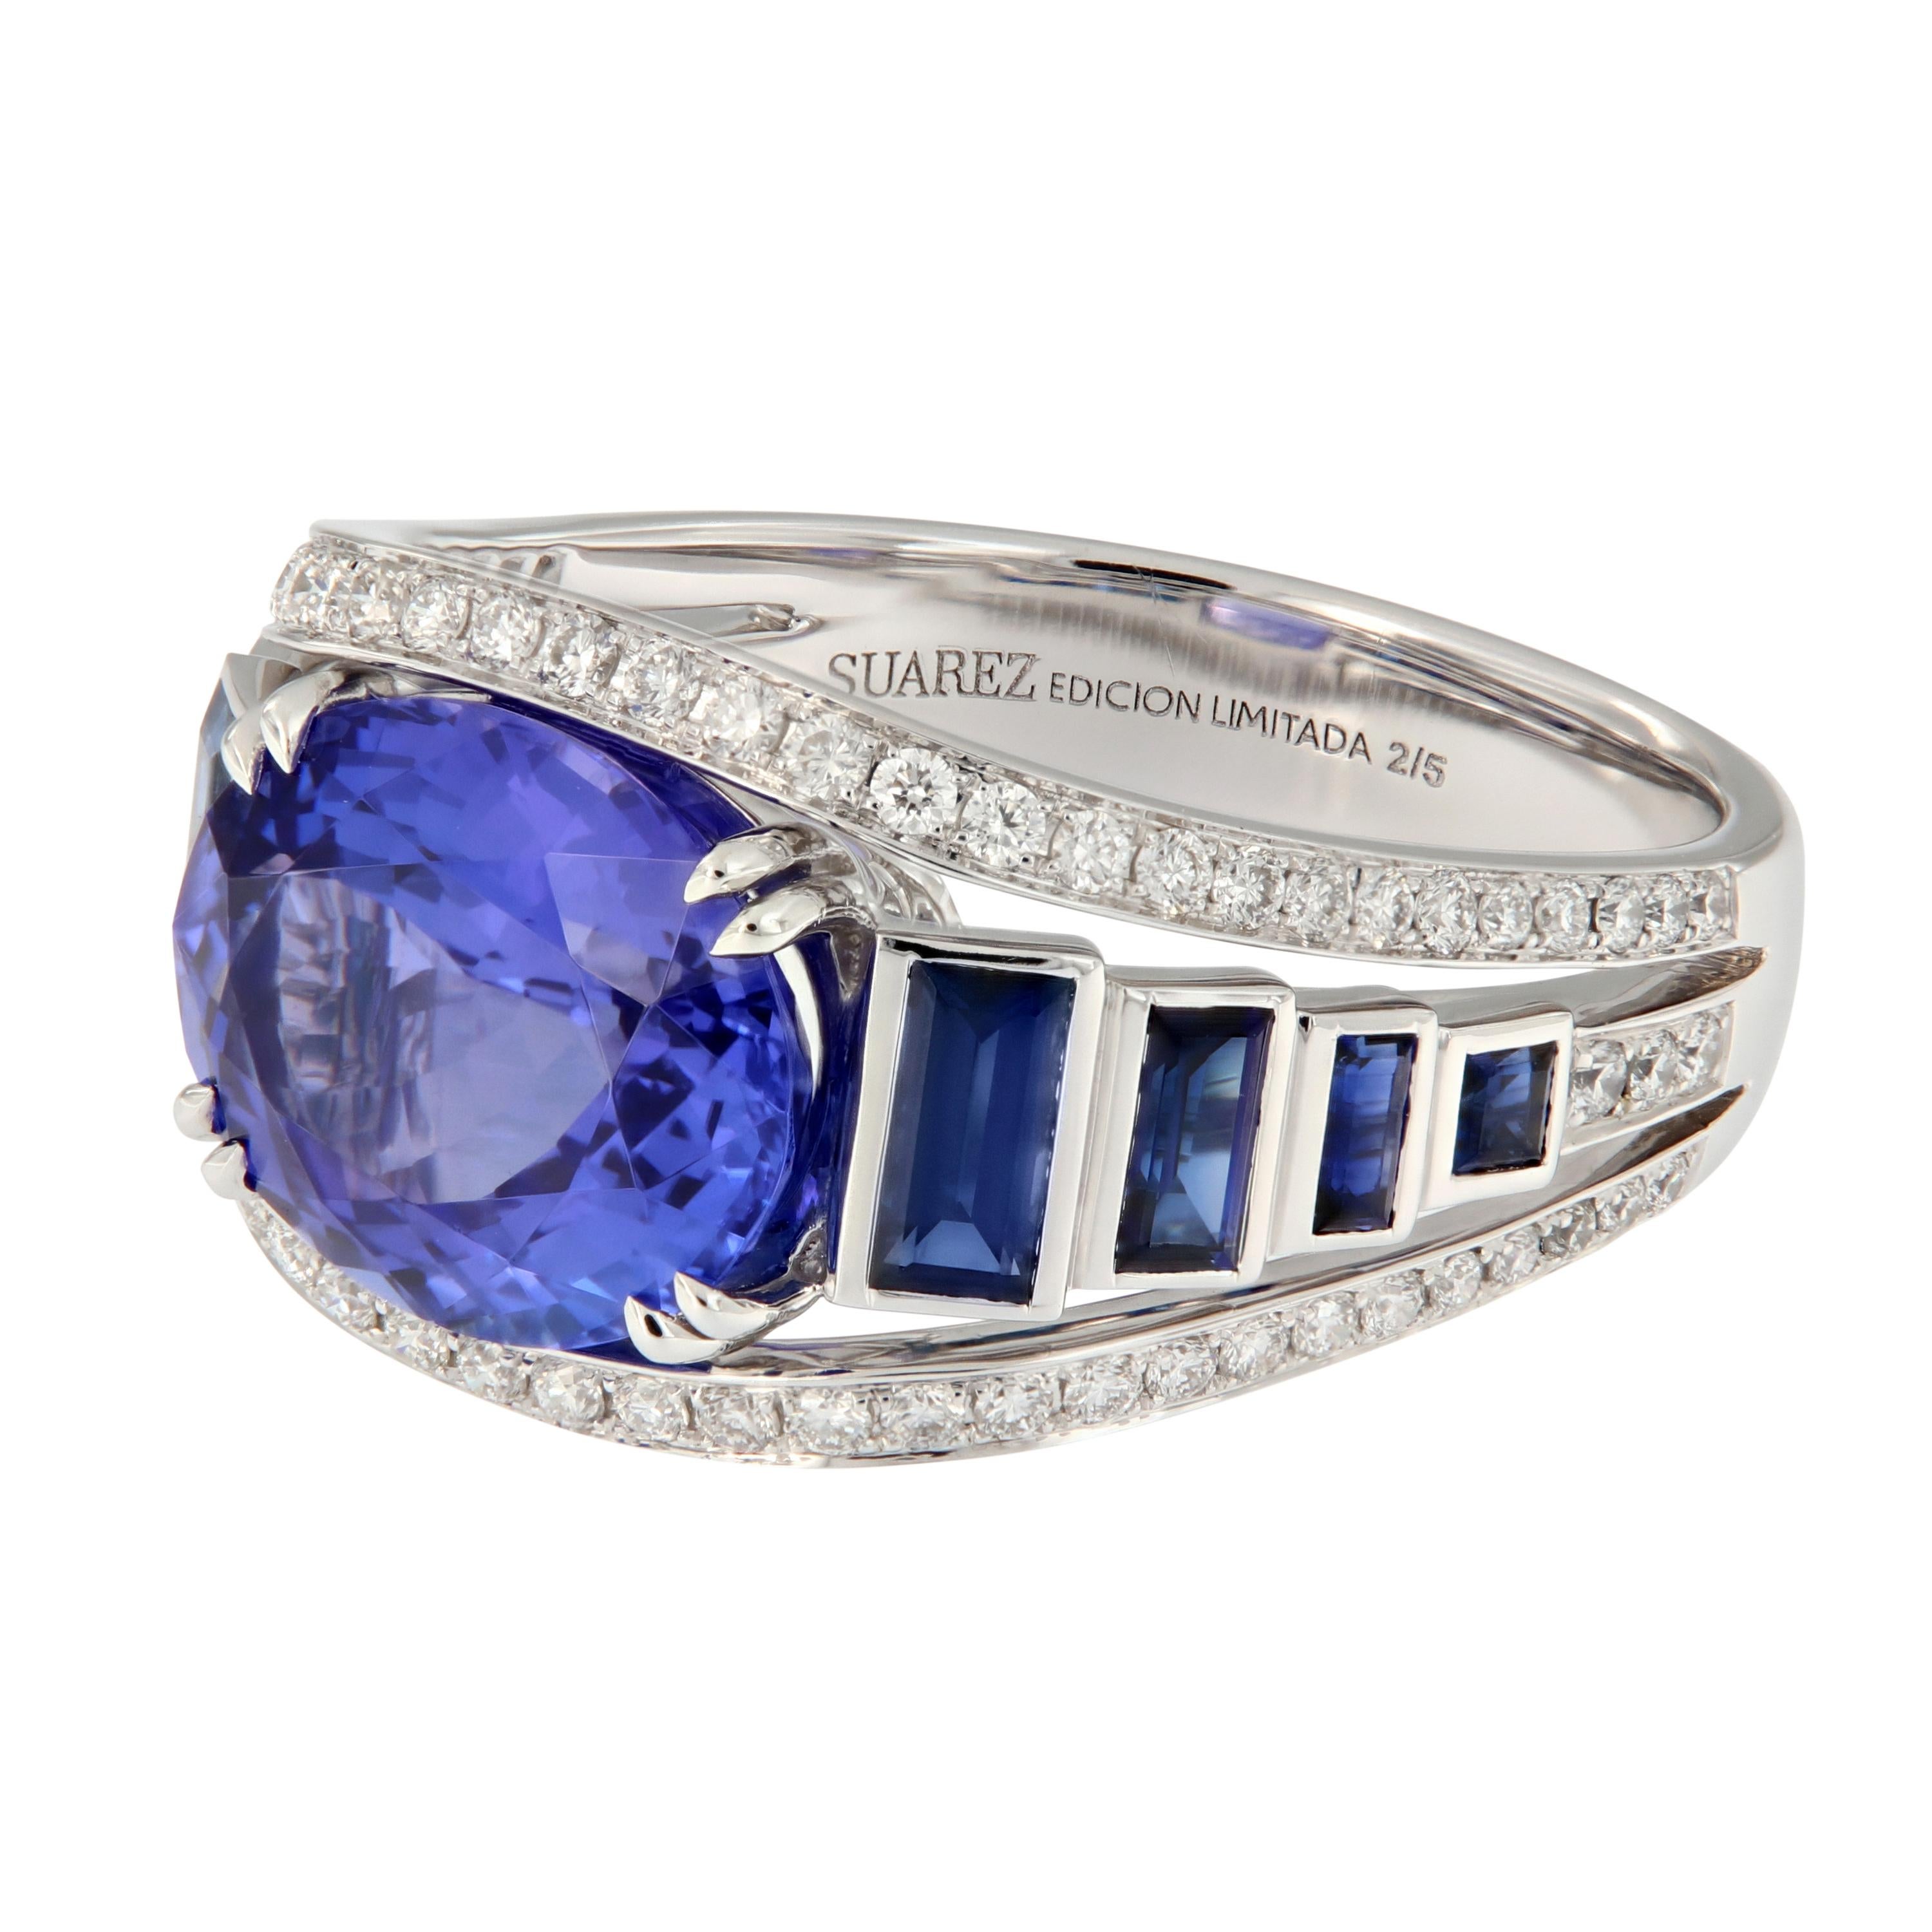 Expertly crafted in 18k white gold, this ring features an oval blue tanzanite center and blue sapphire edging accented with diamonds. This beautiful ring is from the Géométrie Collection by Suarez of Spain. Weighs 7.2 grams. Ring size 6.25.
Marked